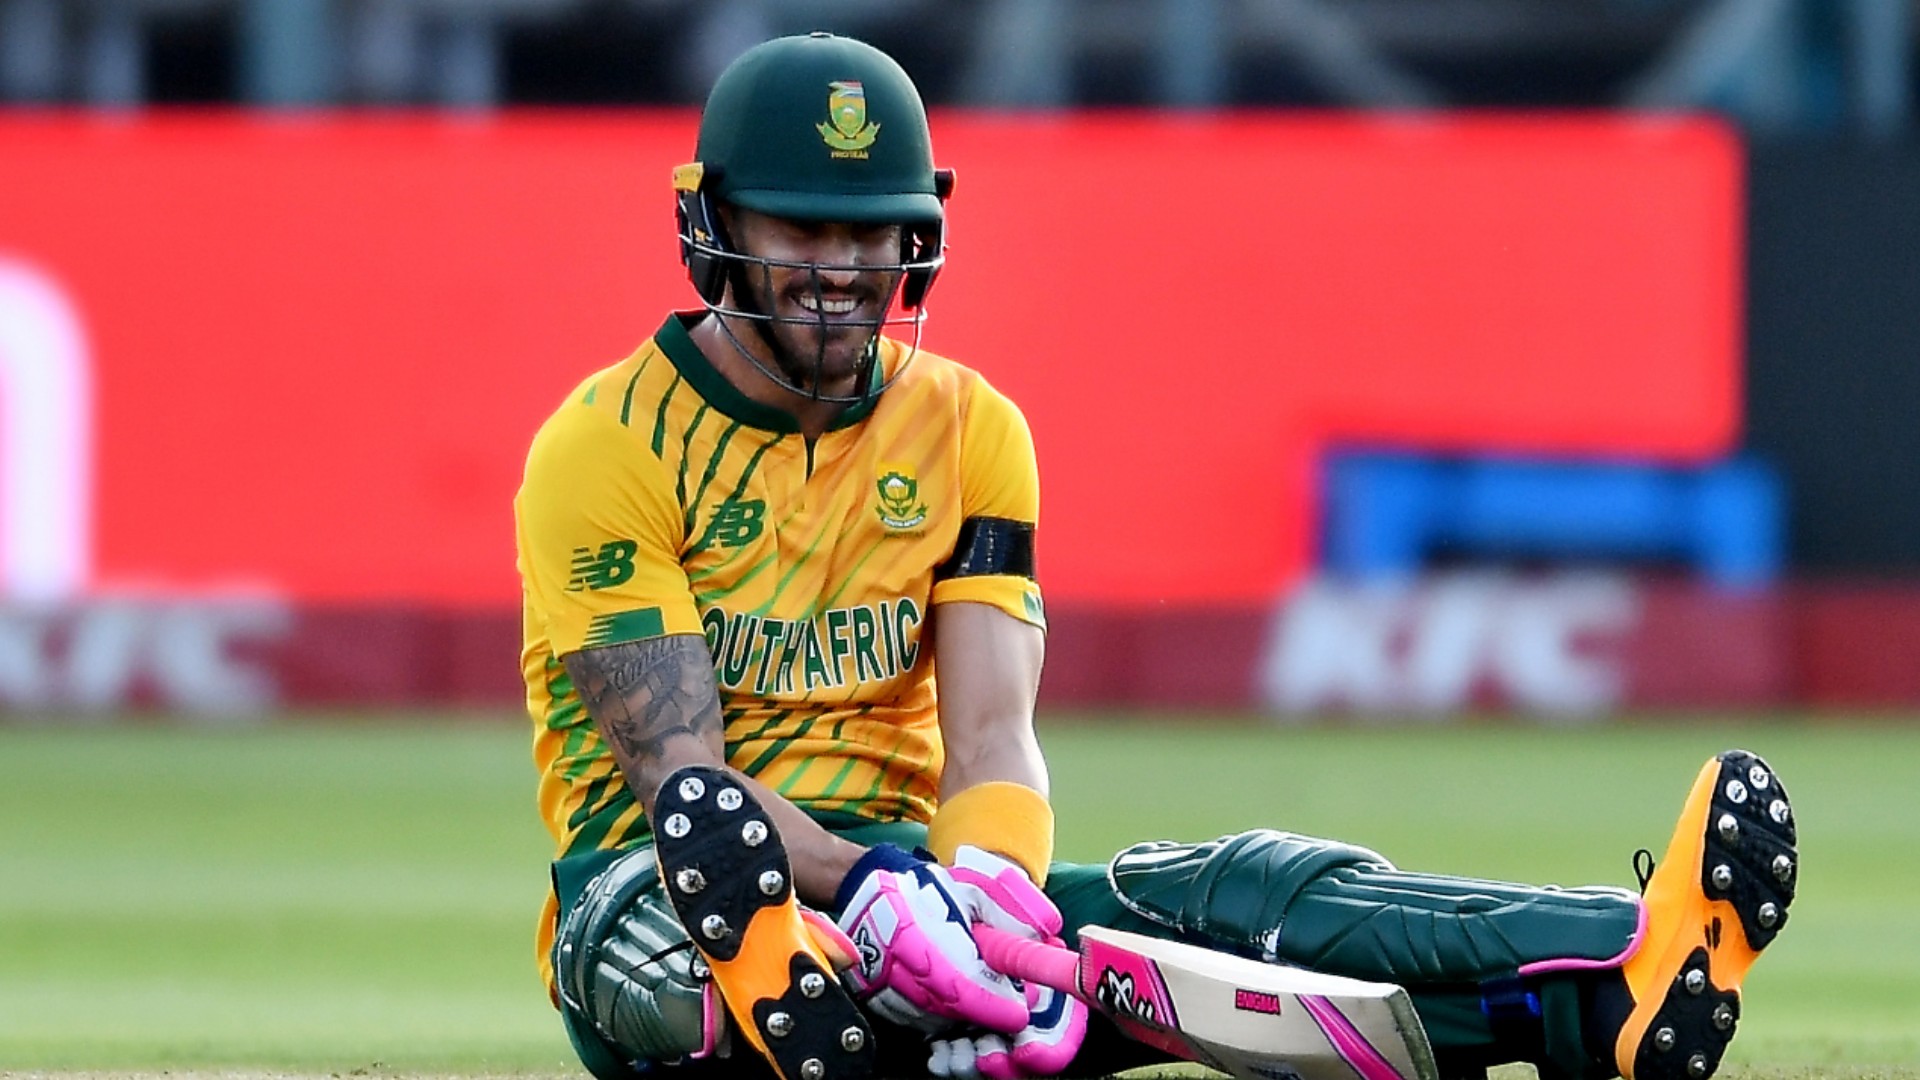 South Africa's IPL contingent returns for T20I series against India